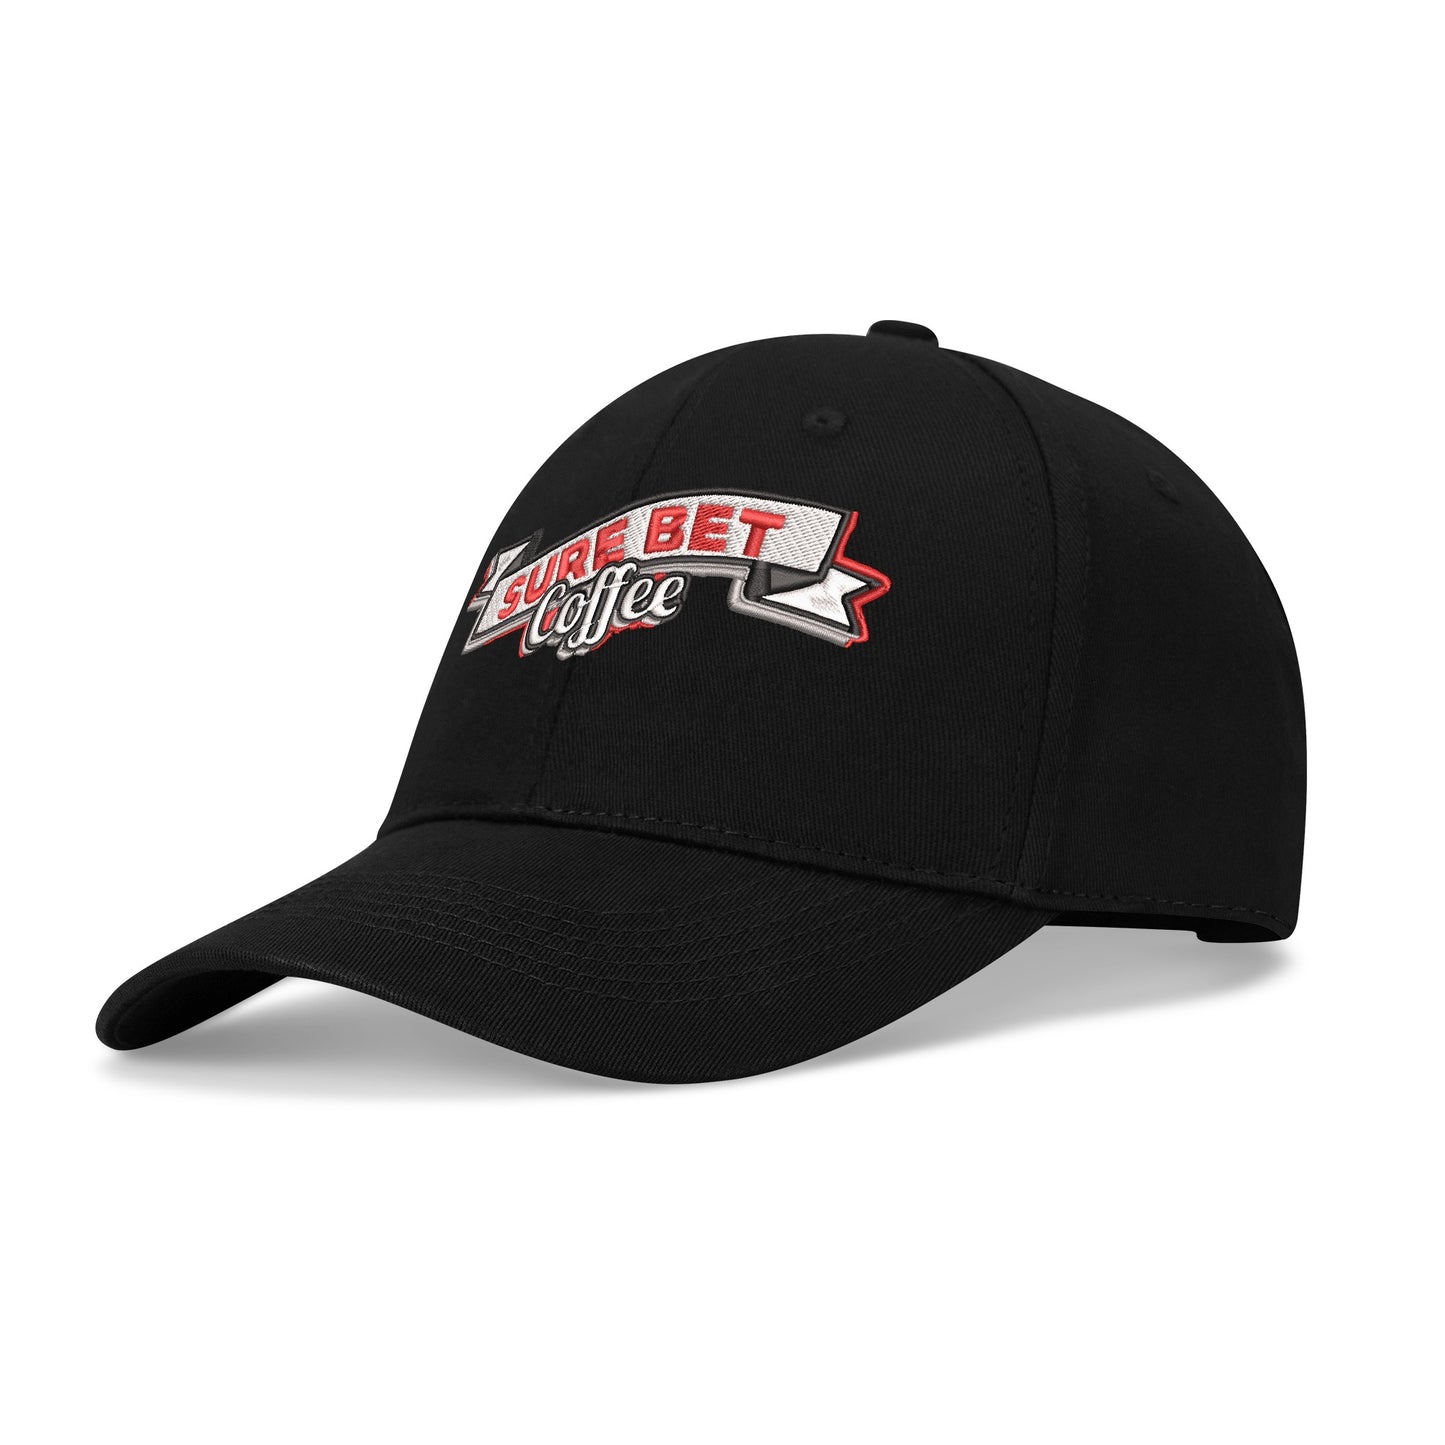 Sure Bet Twill Embroidered Baseball Cap